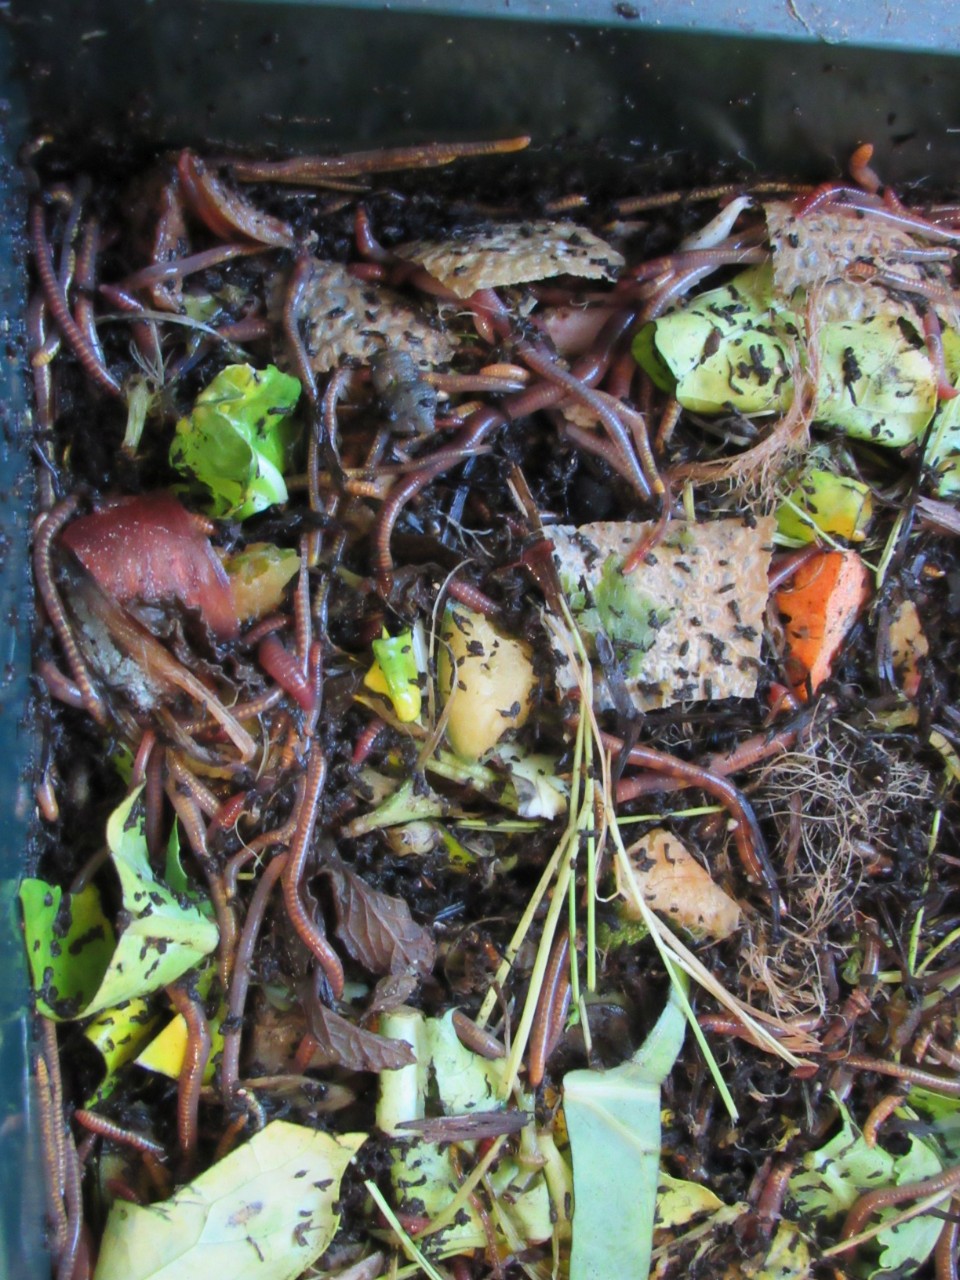 Worms composting